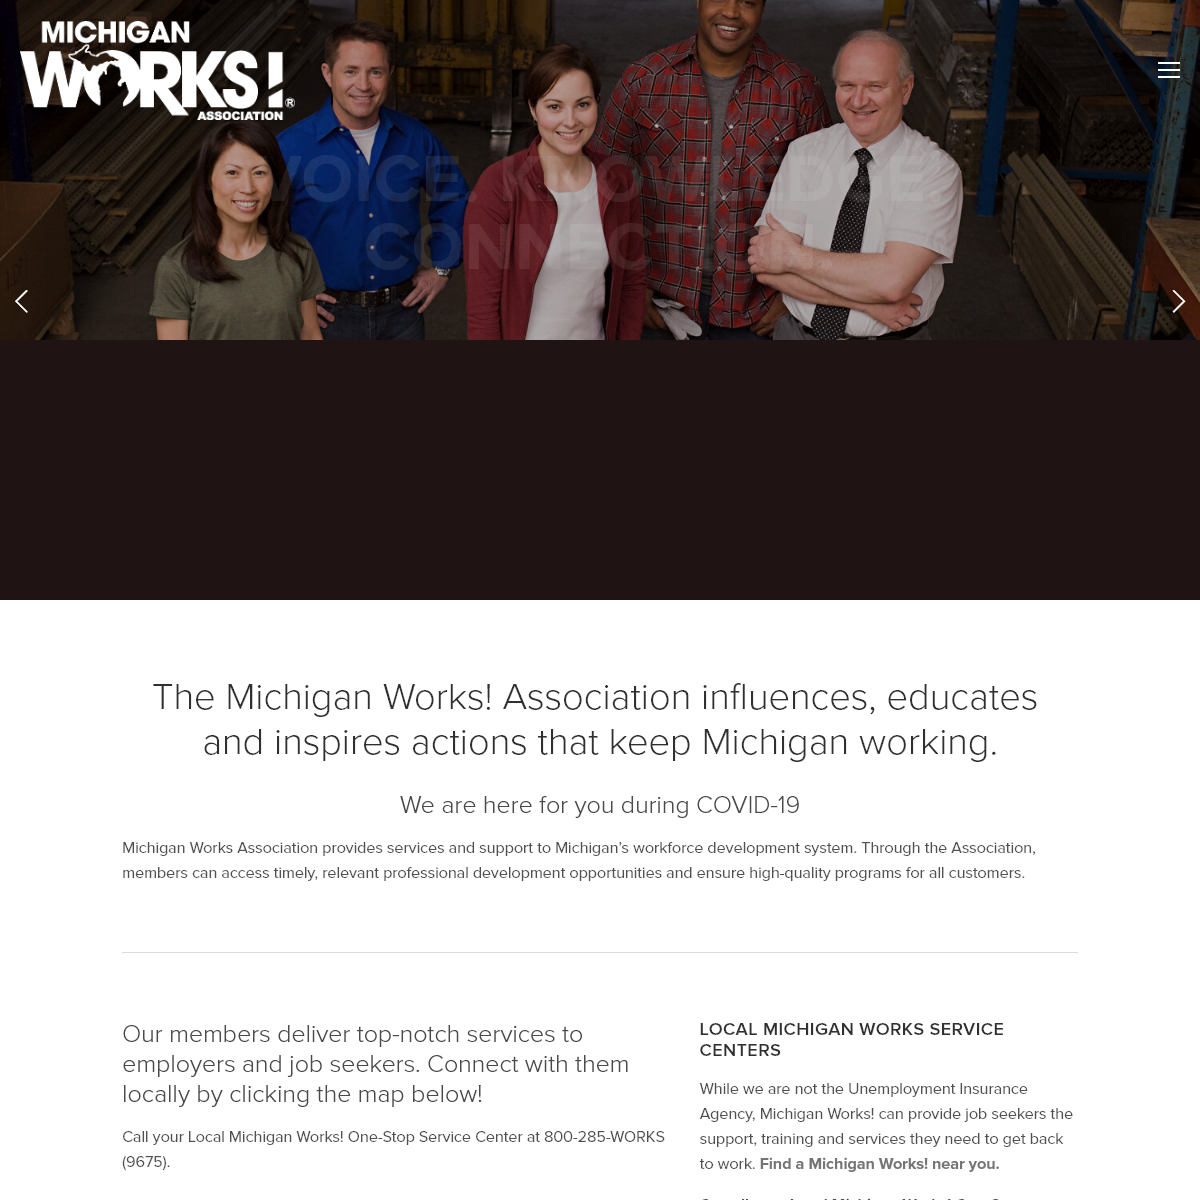 A complete backup of michiganworks.org